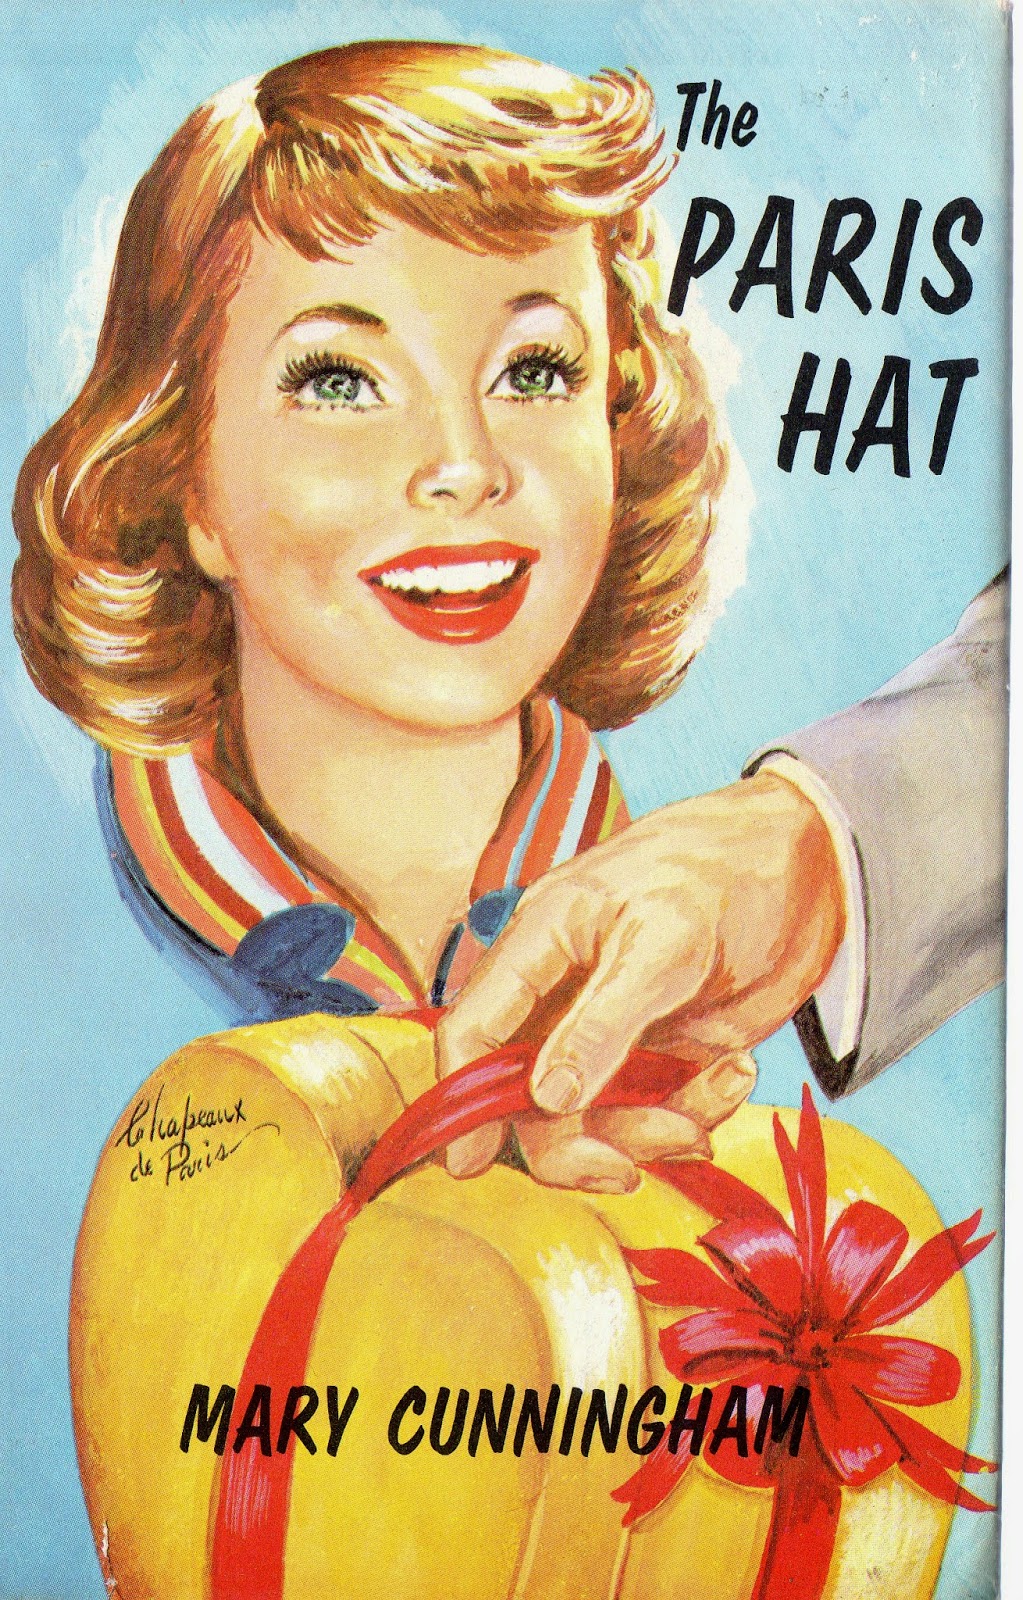 Carly's Malt Shop: The Paris Hat by Mary Cunningham (1958)